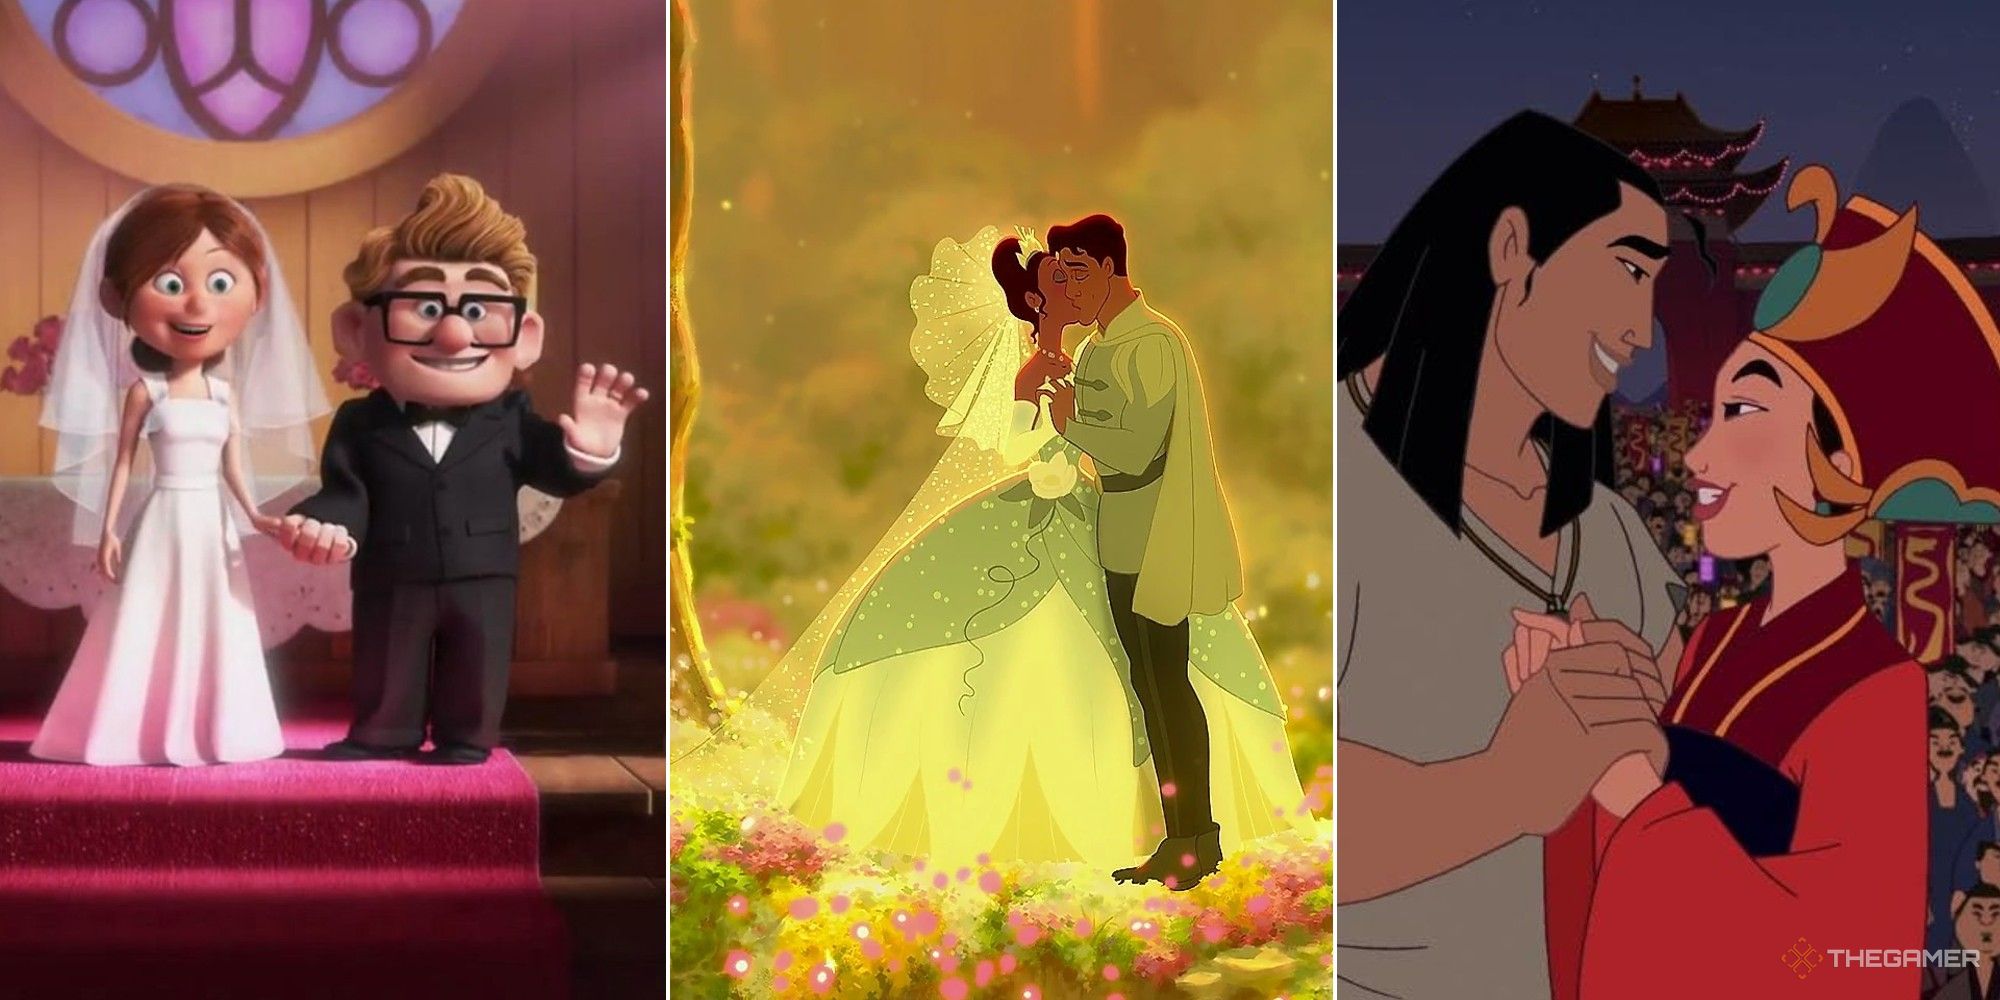 Collage showing disney weddings from movies Up, Princess and the Frog and Mulan II